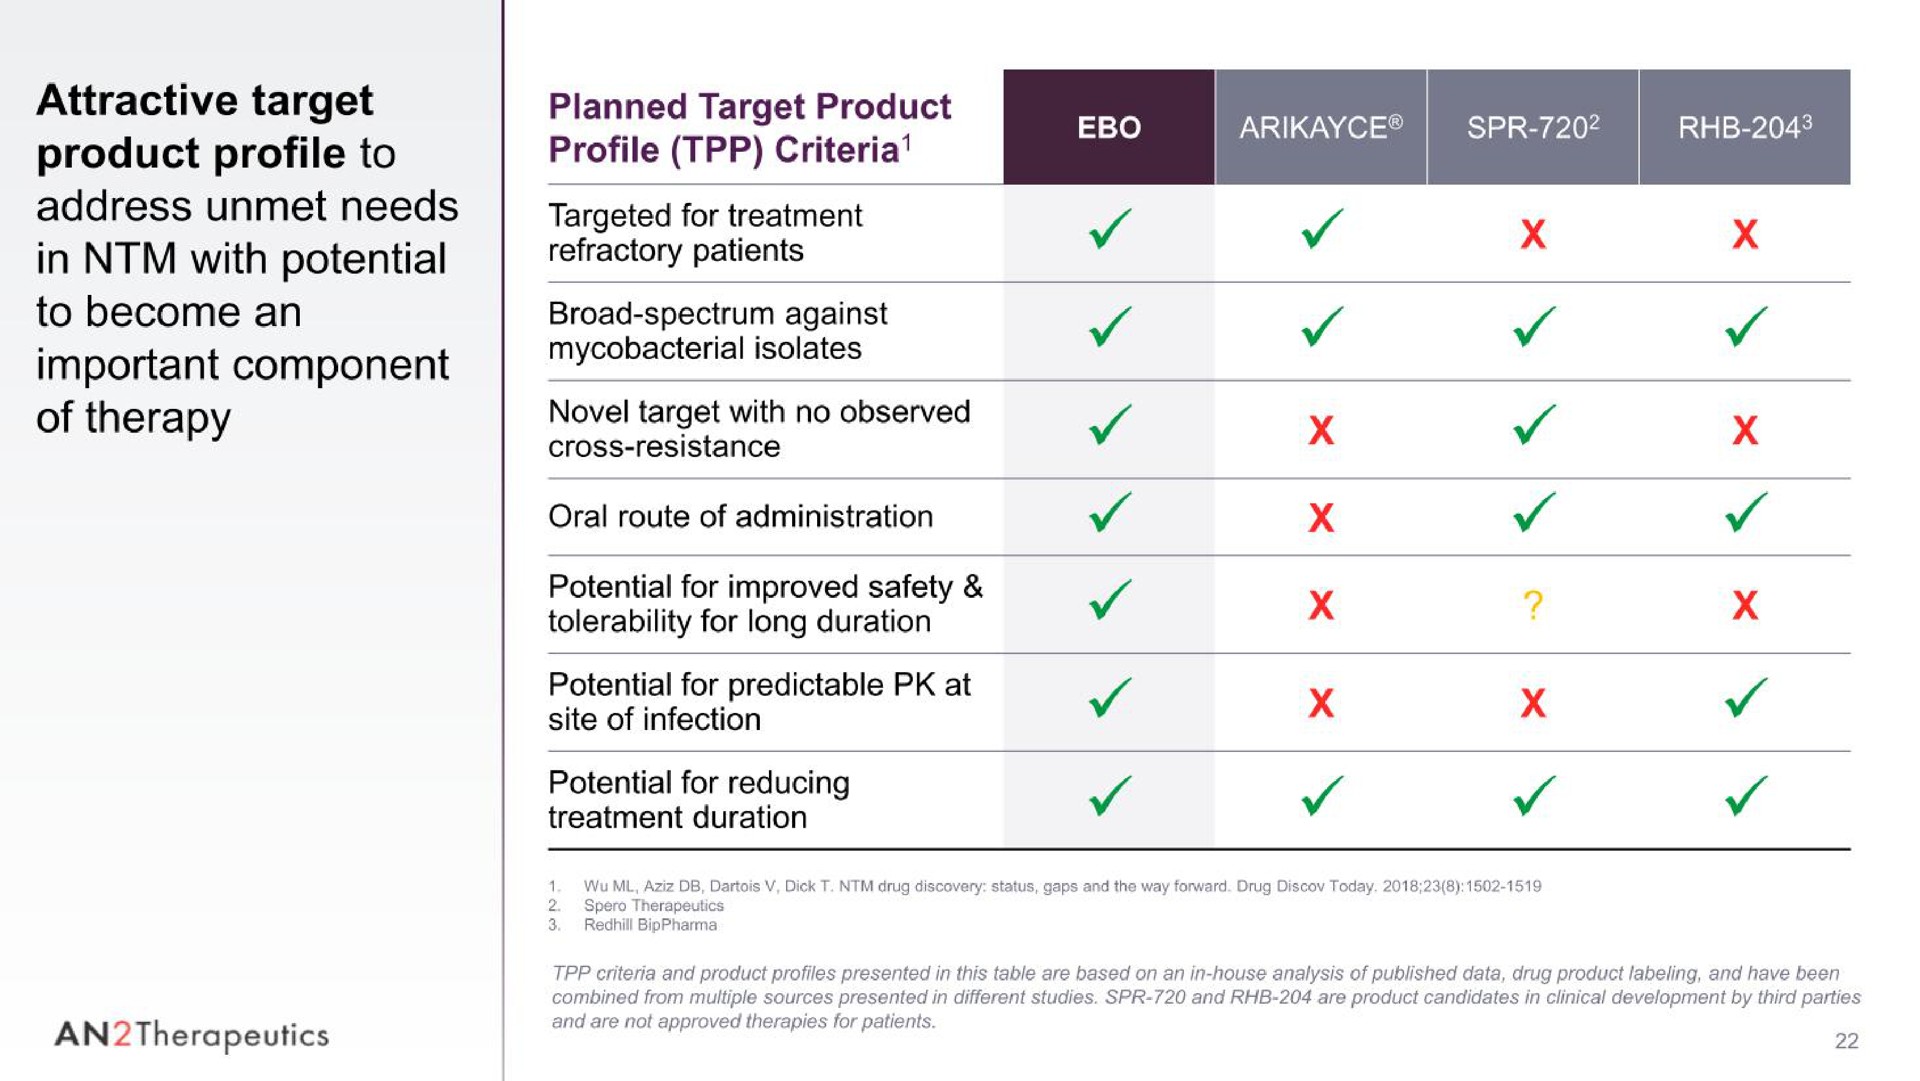 attractive target product profile to address unmet needs in with potential to become an important component of therapy planned target product profile criteria targeted for treatment refractory patients broad spectrum against isolates novel target with no observed potential for improved safety tolerability for long duration potential for predictable at site of infection potential for reducing als an therapeutics | AN2 Therapeutics